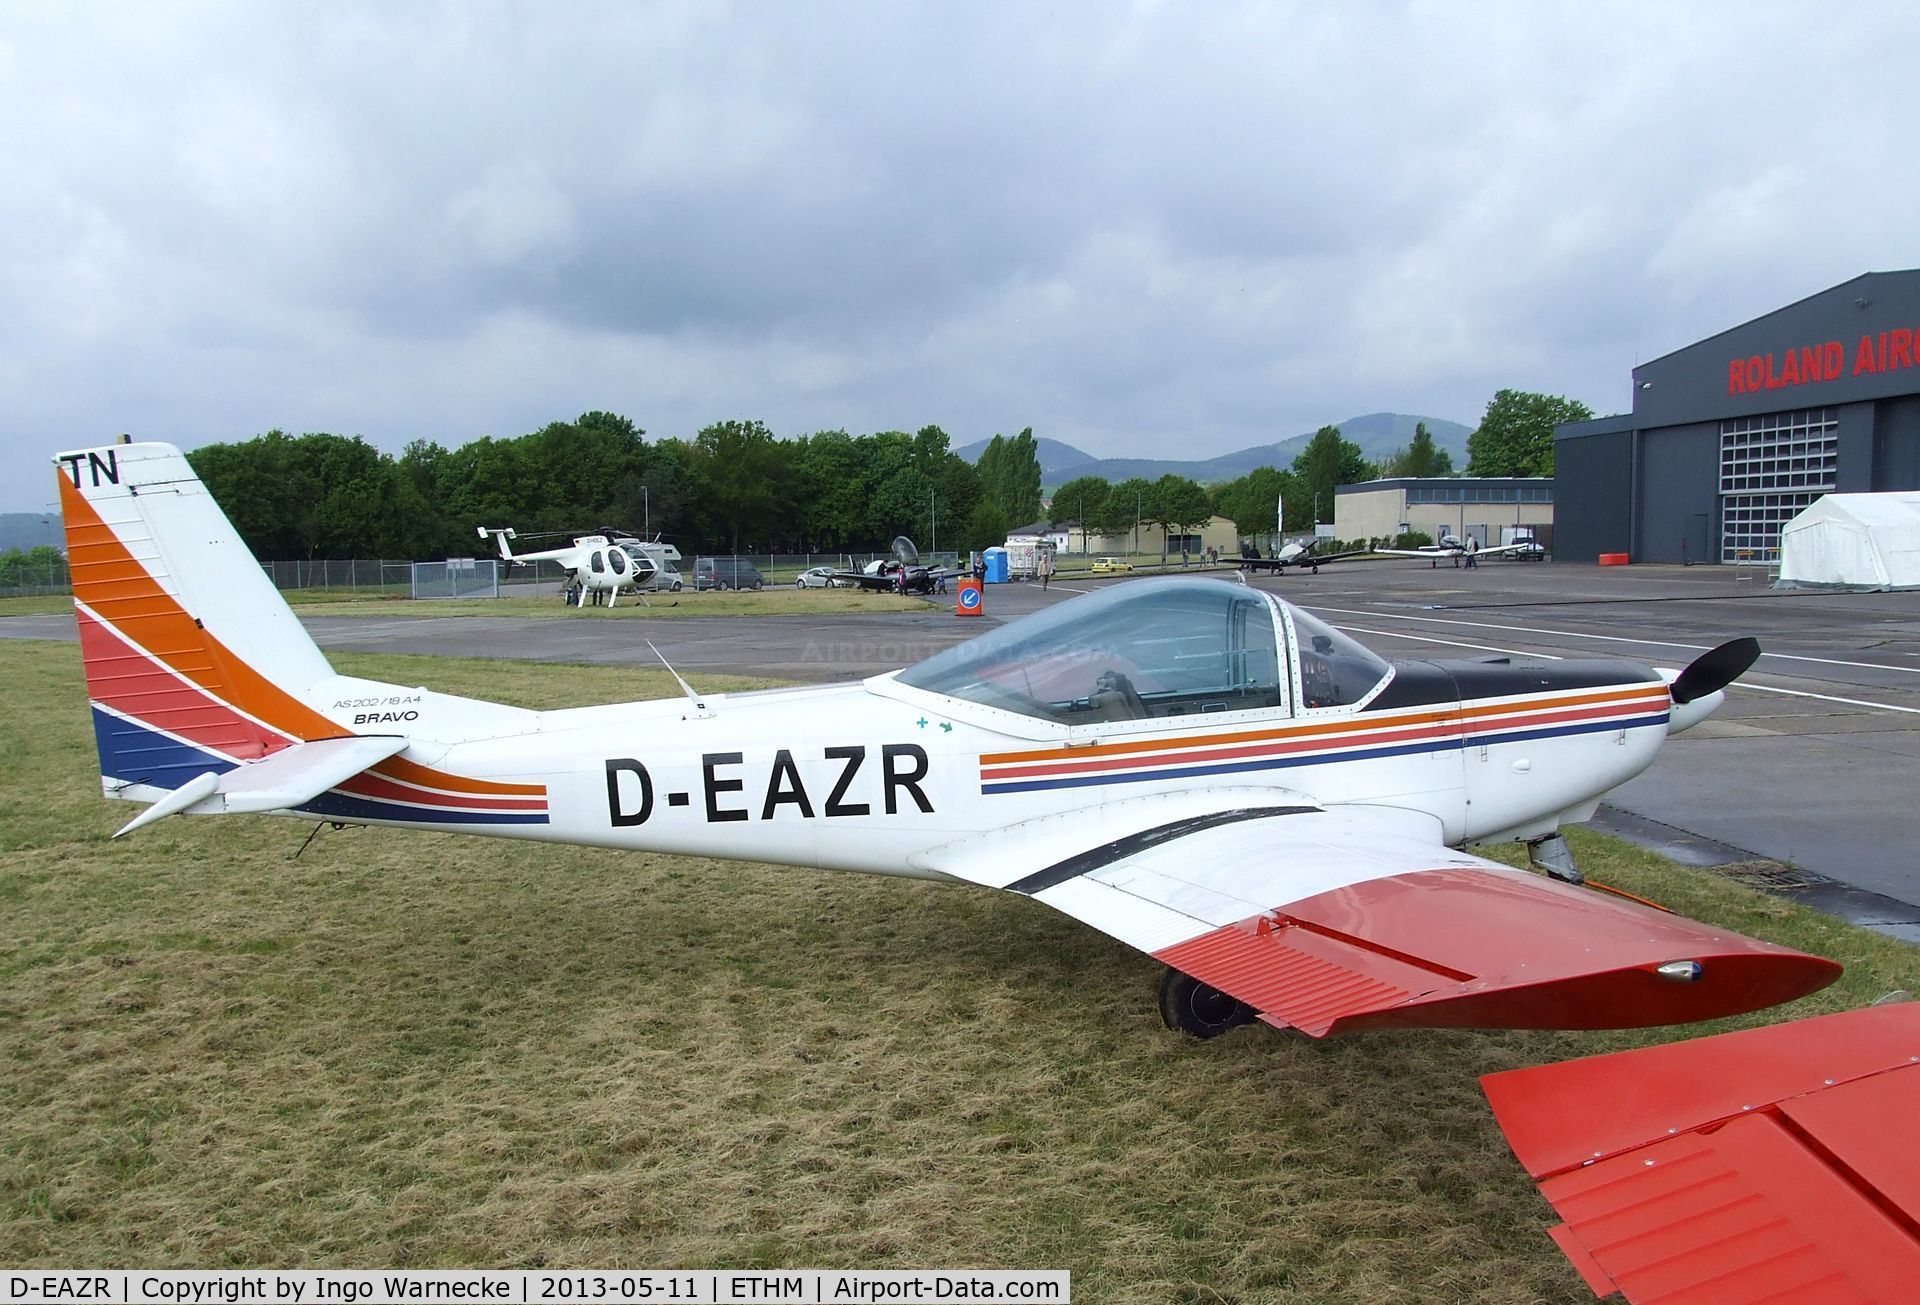 D-EAZR, 1988 FFA AS-202/18A-4 Bravo C/N 233, FFA AS-202/18A4 Bravo during an open day at the Fliegendes Museum Mendig (Flying Museum) at former German Army Aviation base, now civilian Mendig airfield